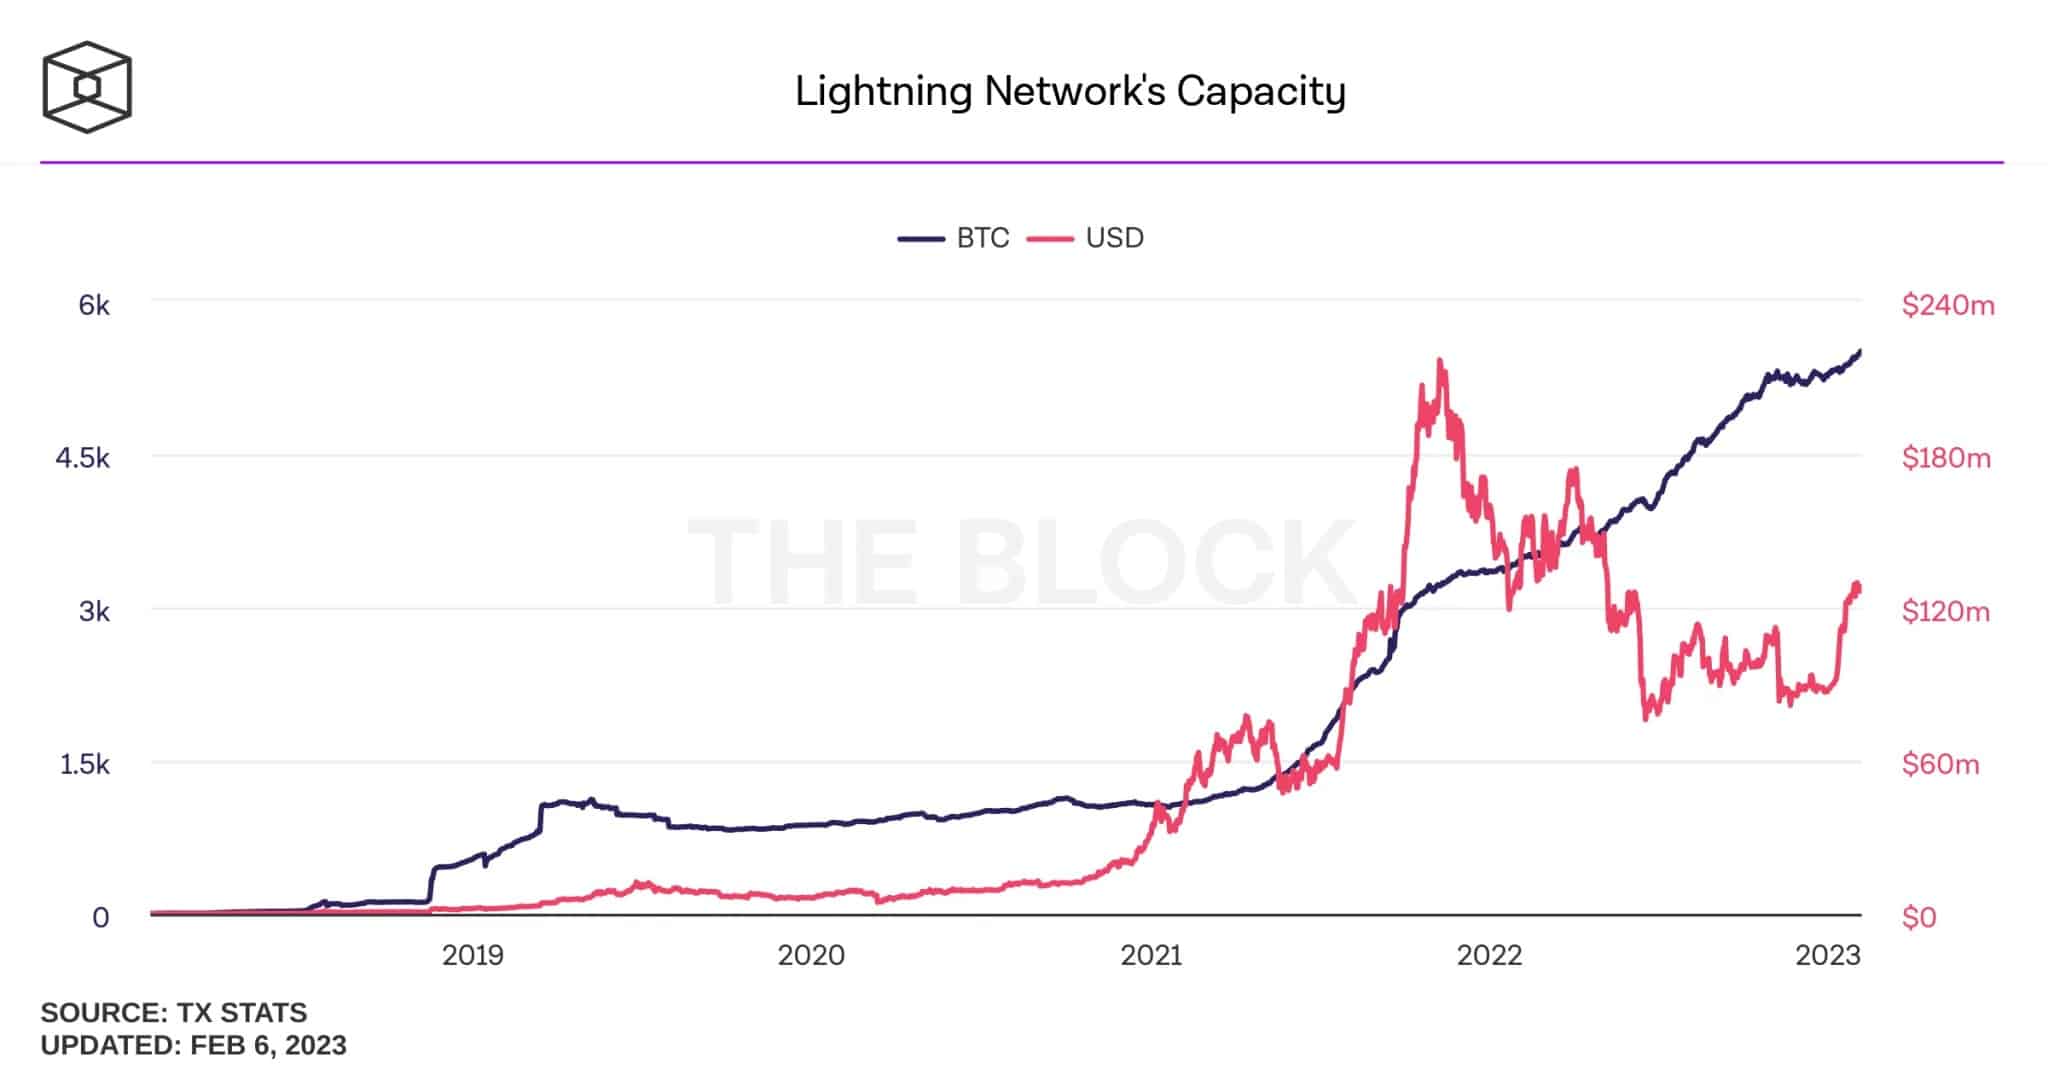 Figure 1 - Evolution of the bitcoins deposited on the Lightning Network and their value in dollars between January 2018 and February 2023